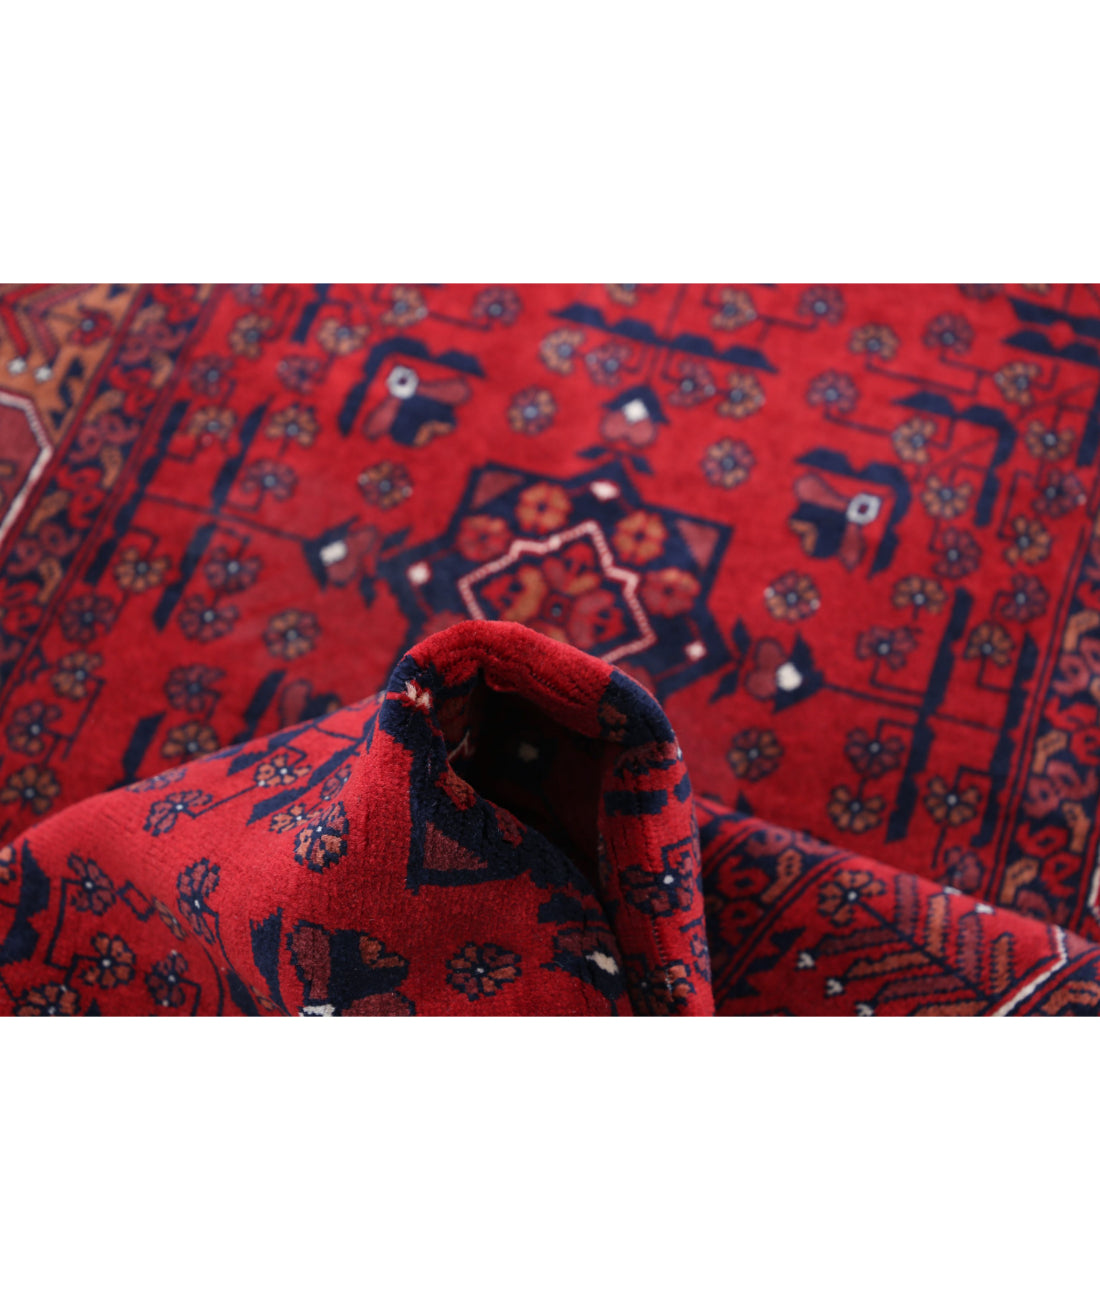 Afghan 2'8'' X 6'1'' Hand-Knotted Wool Rug 2'8'' x 6'1'' (80 X 183) / Red / Red